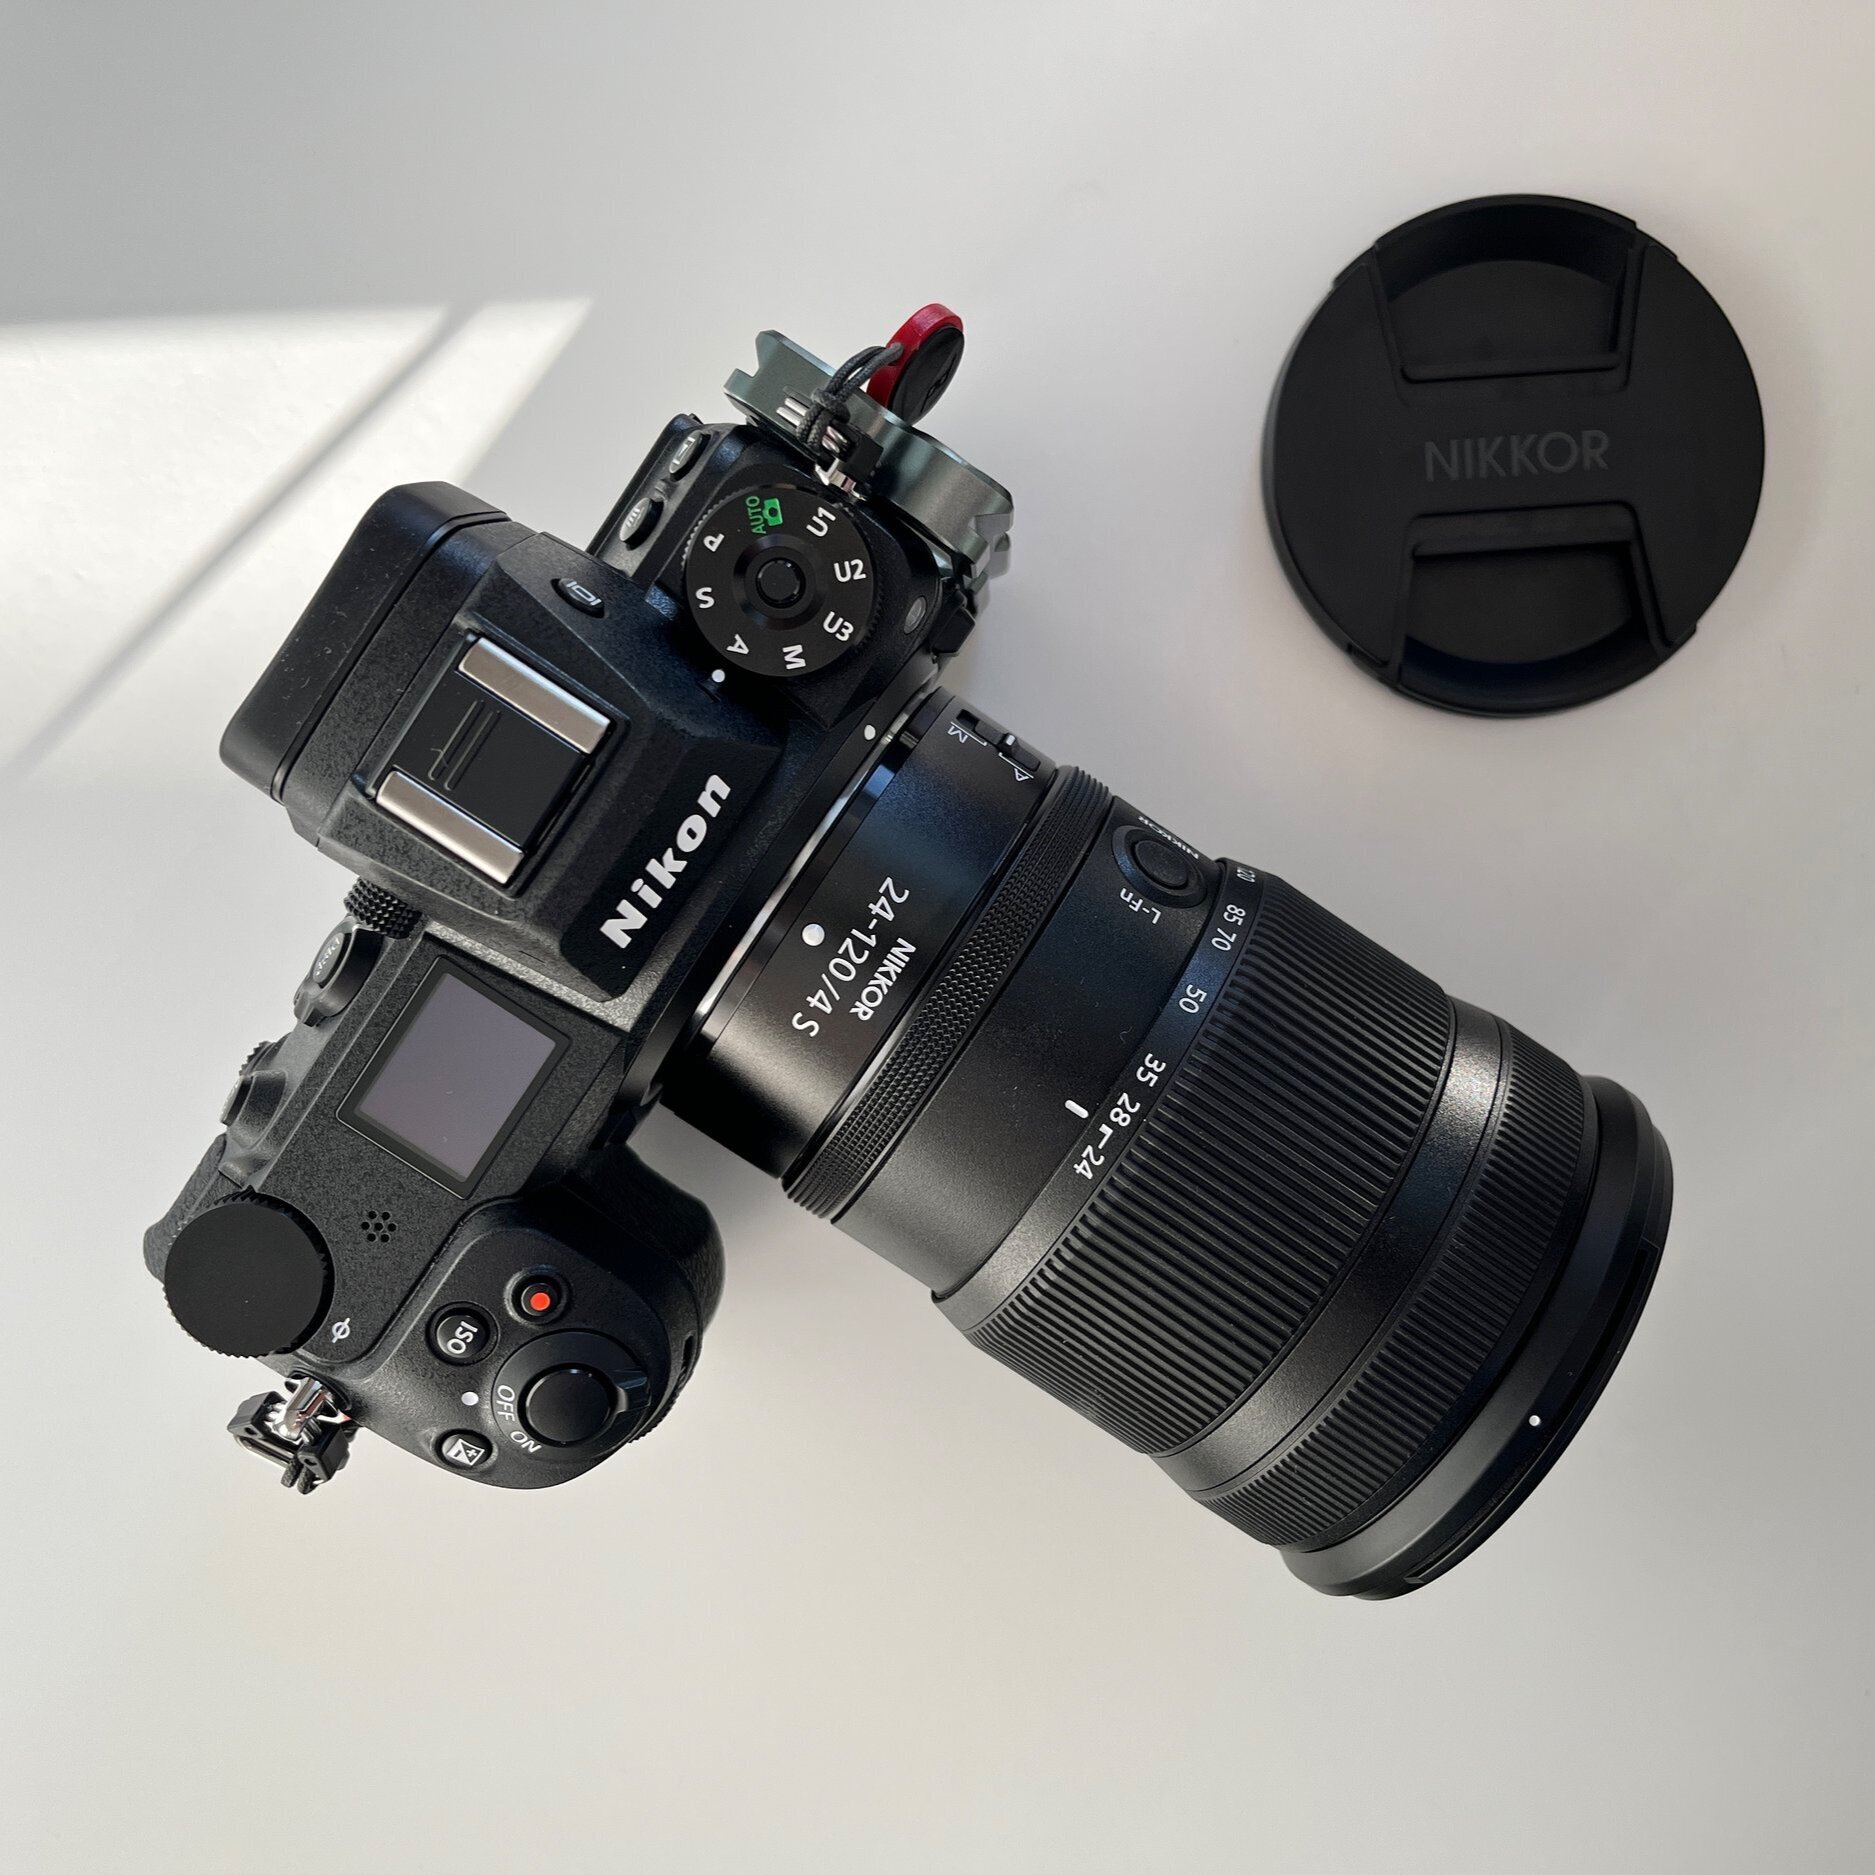 Nikon Z 30 camera review: A photographer's perspective